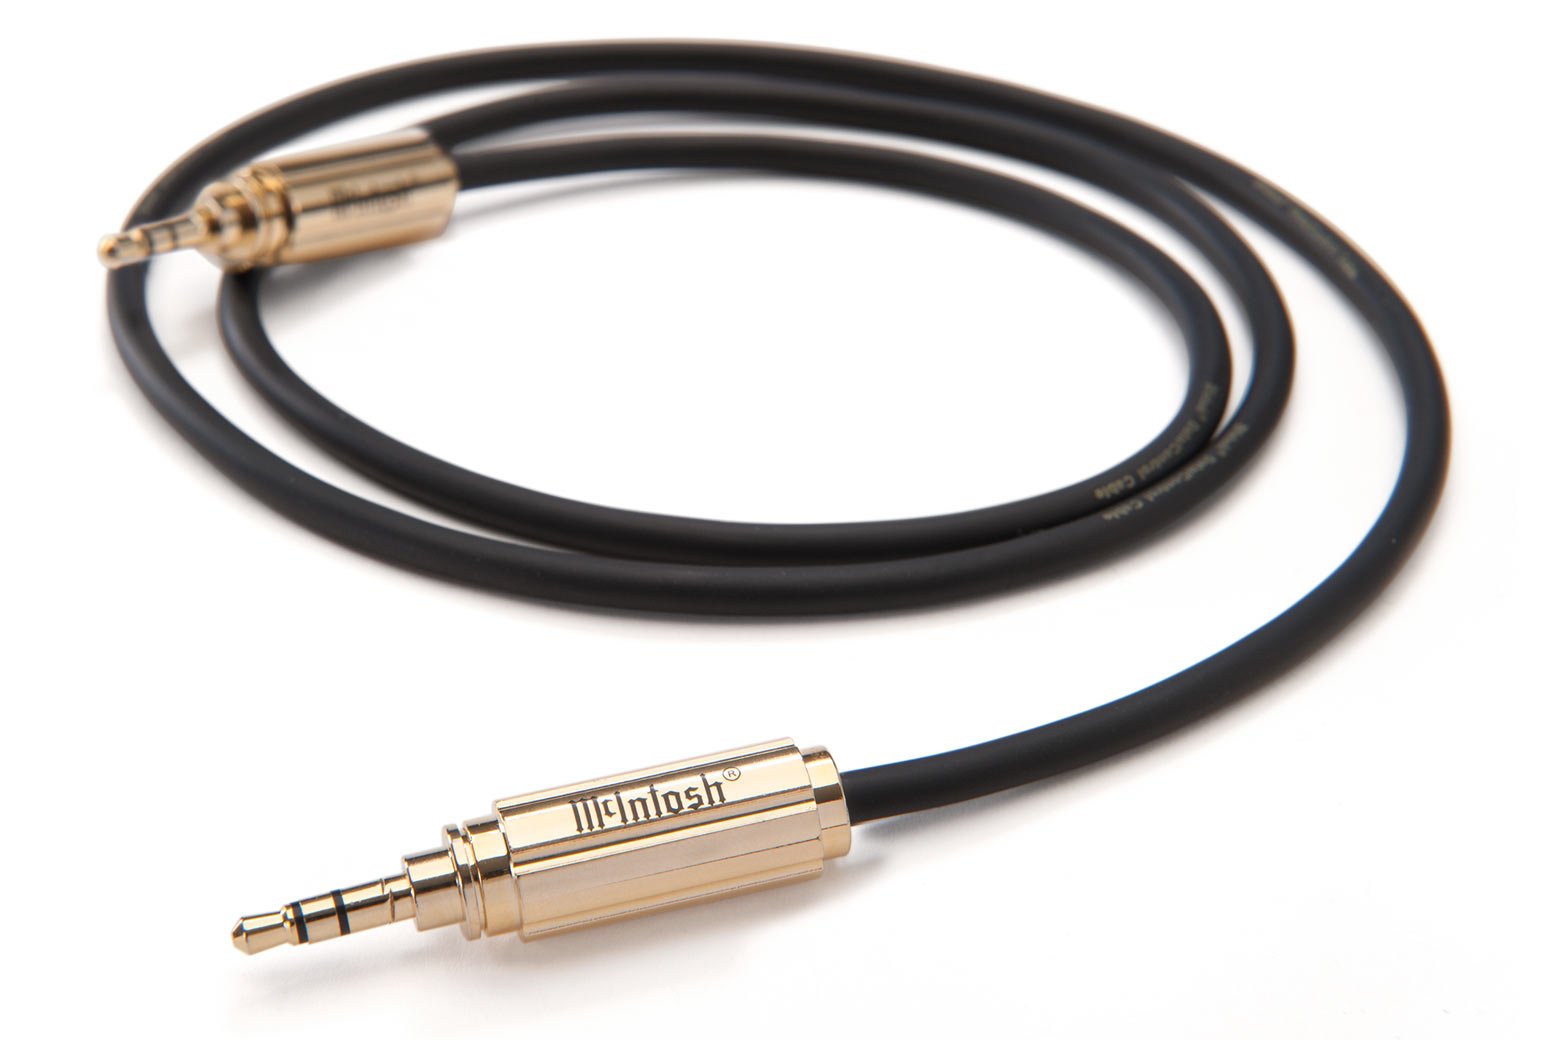 McIntosh Power Control Cables - Sold as a Single (In-Store Purchases Only)